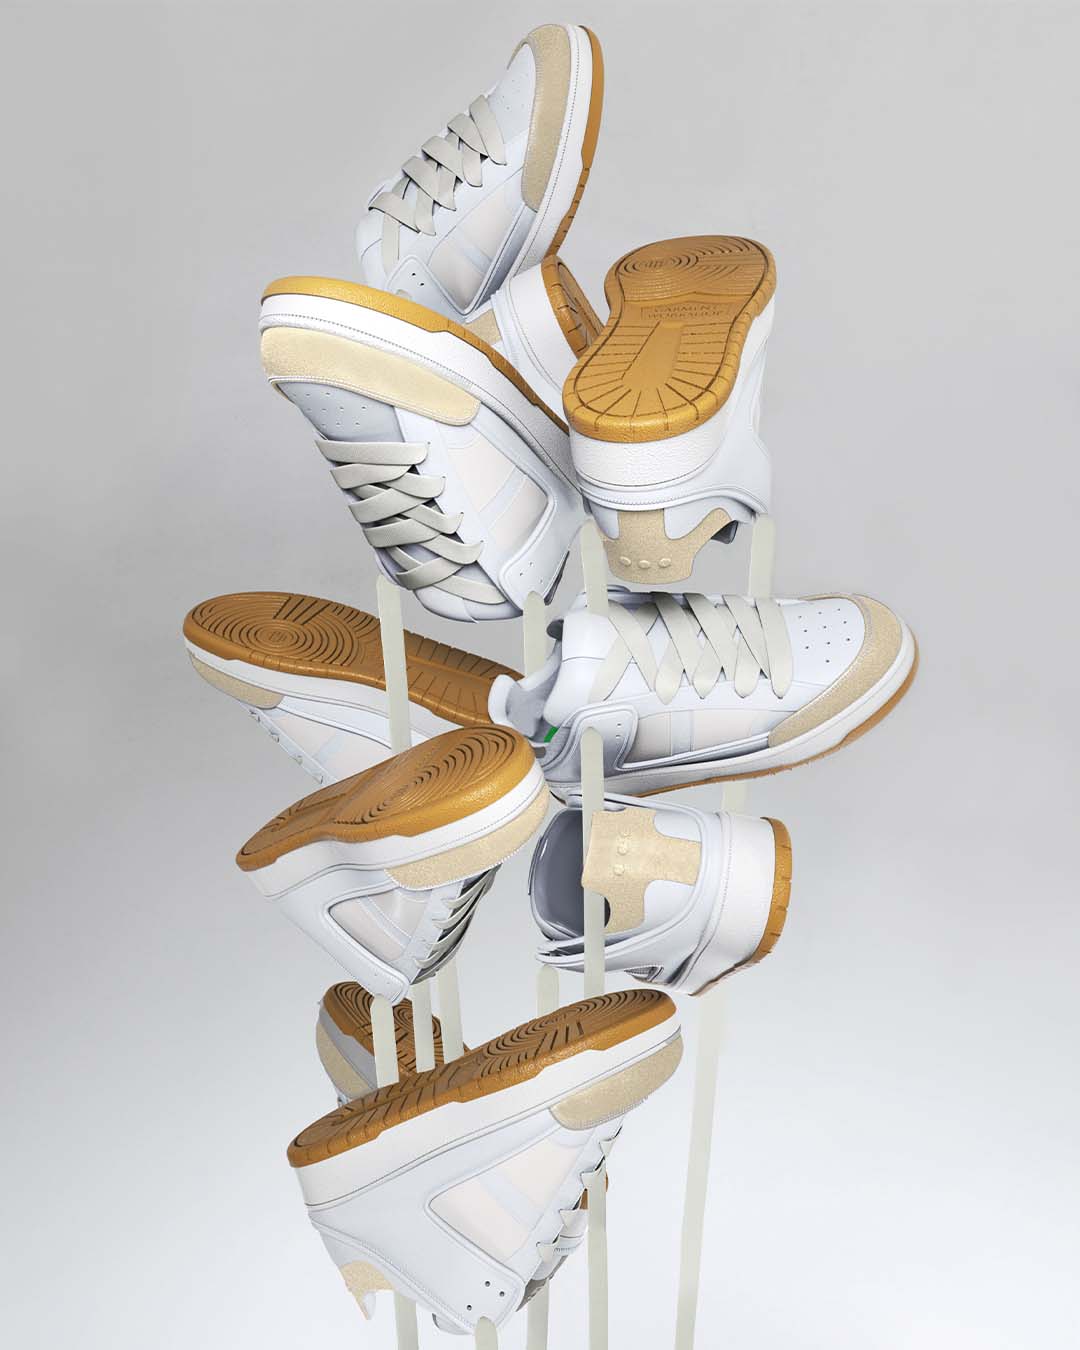 FLOATING SHOES.jpg image from LEATHER S01 PR0 SNEAKERS RAL7000STUDIO project created on 2022-12-12